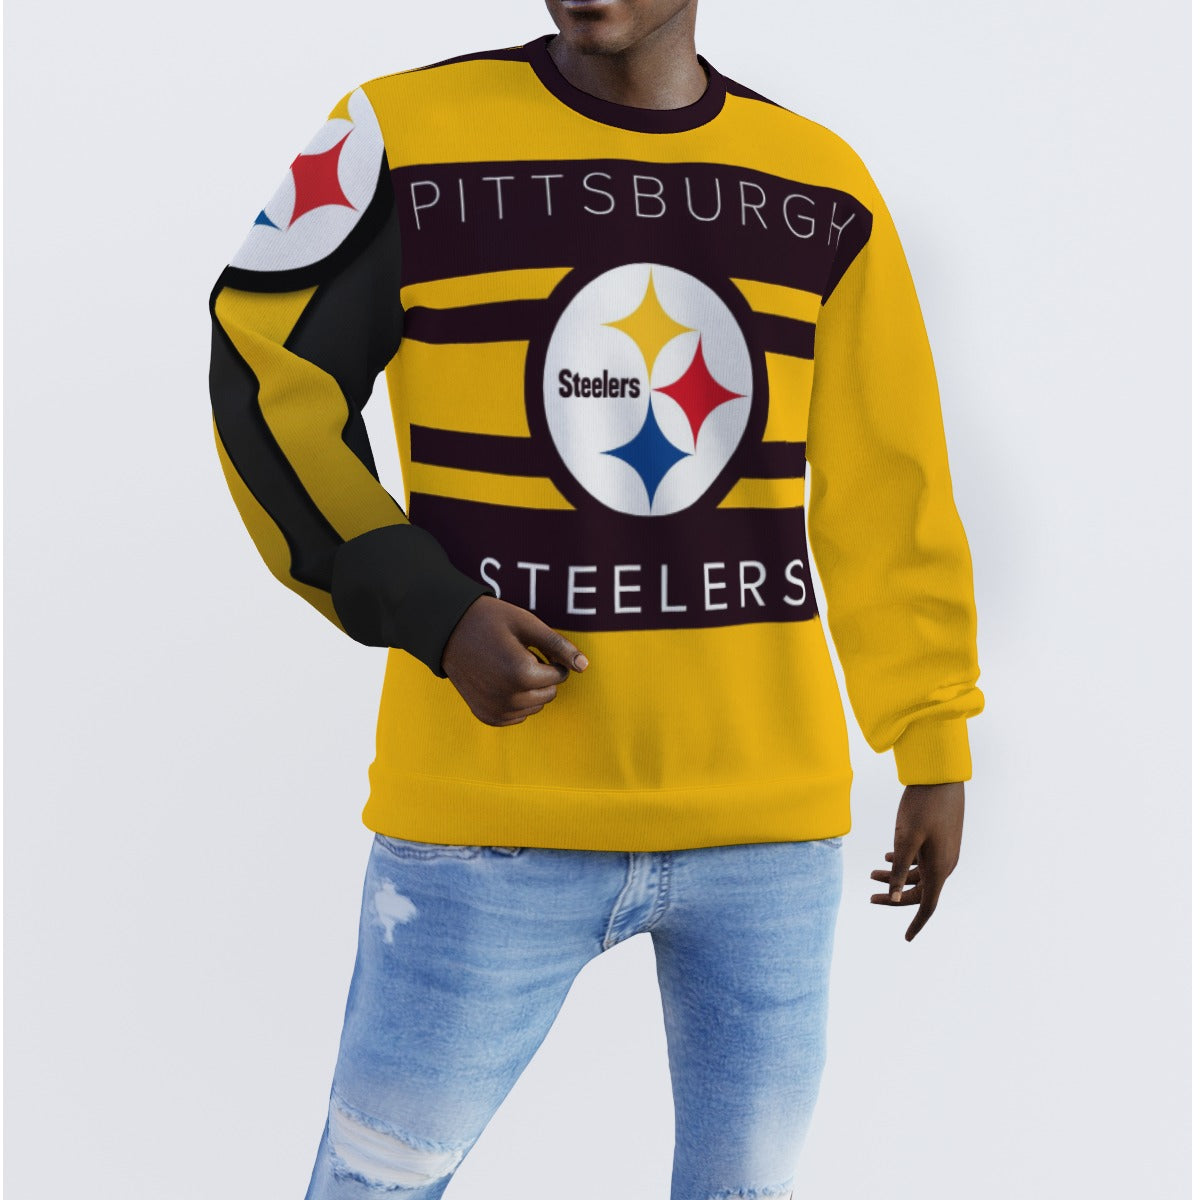 pittsburgh steelers jeans